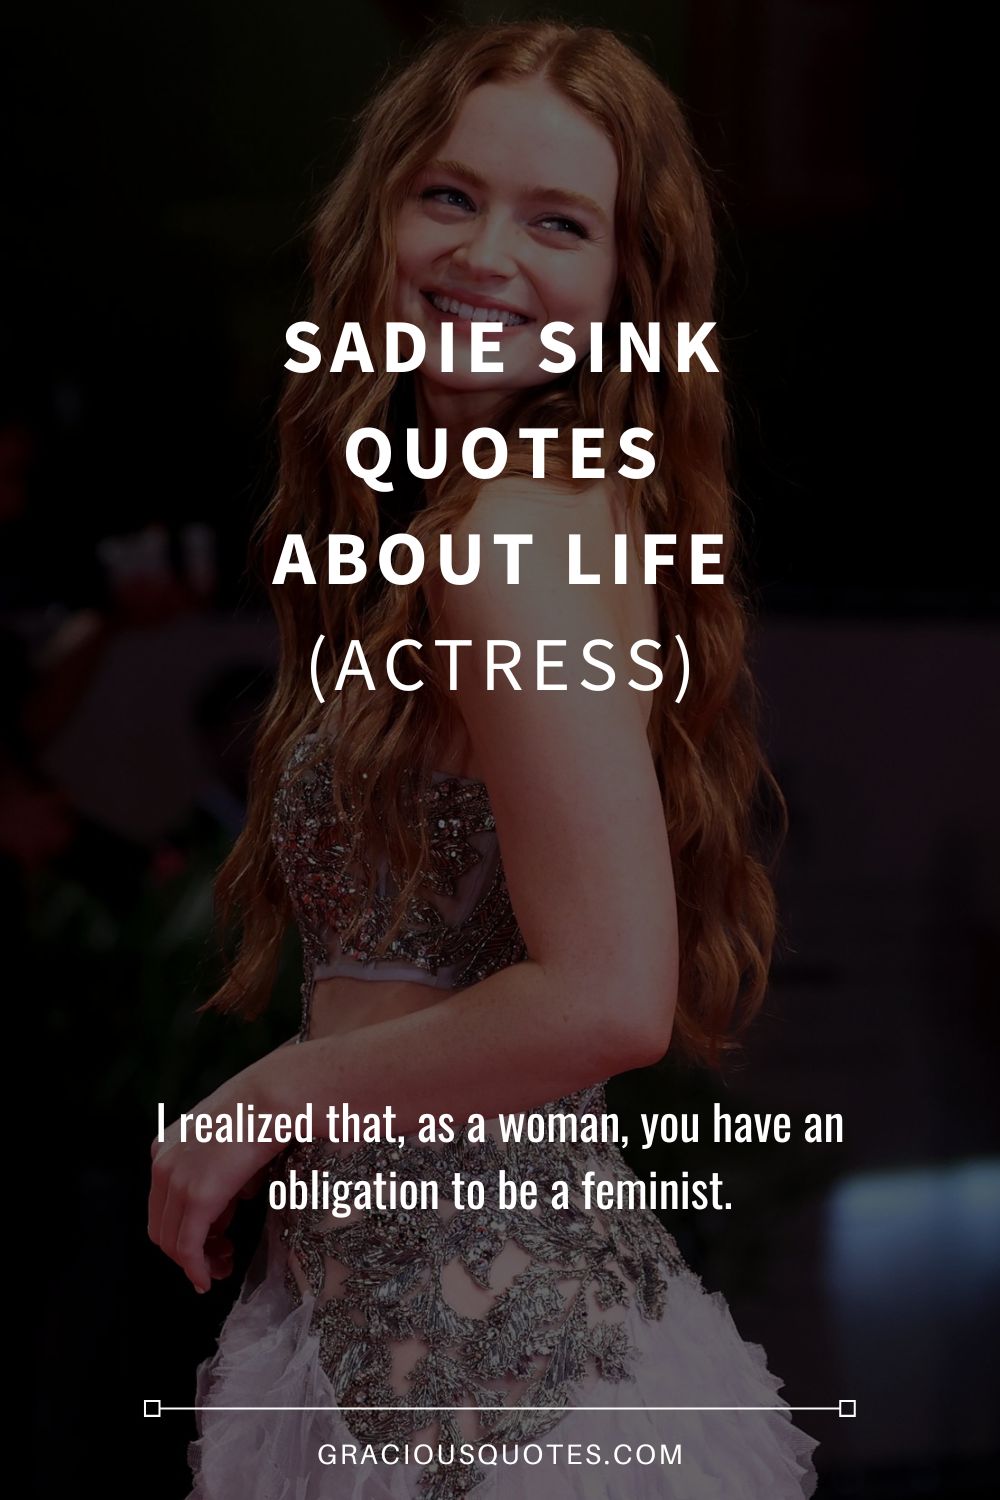 Sadie Sink Quotes About Life (ACTRESS) - Gracious Quotes